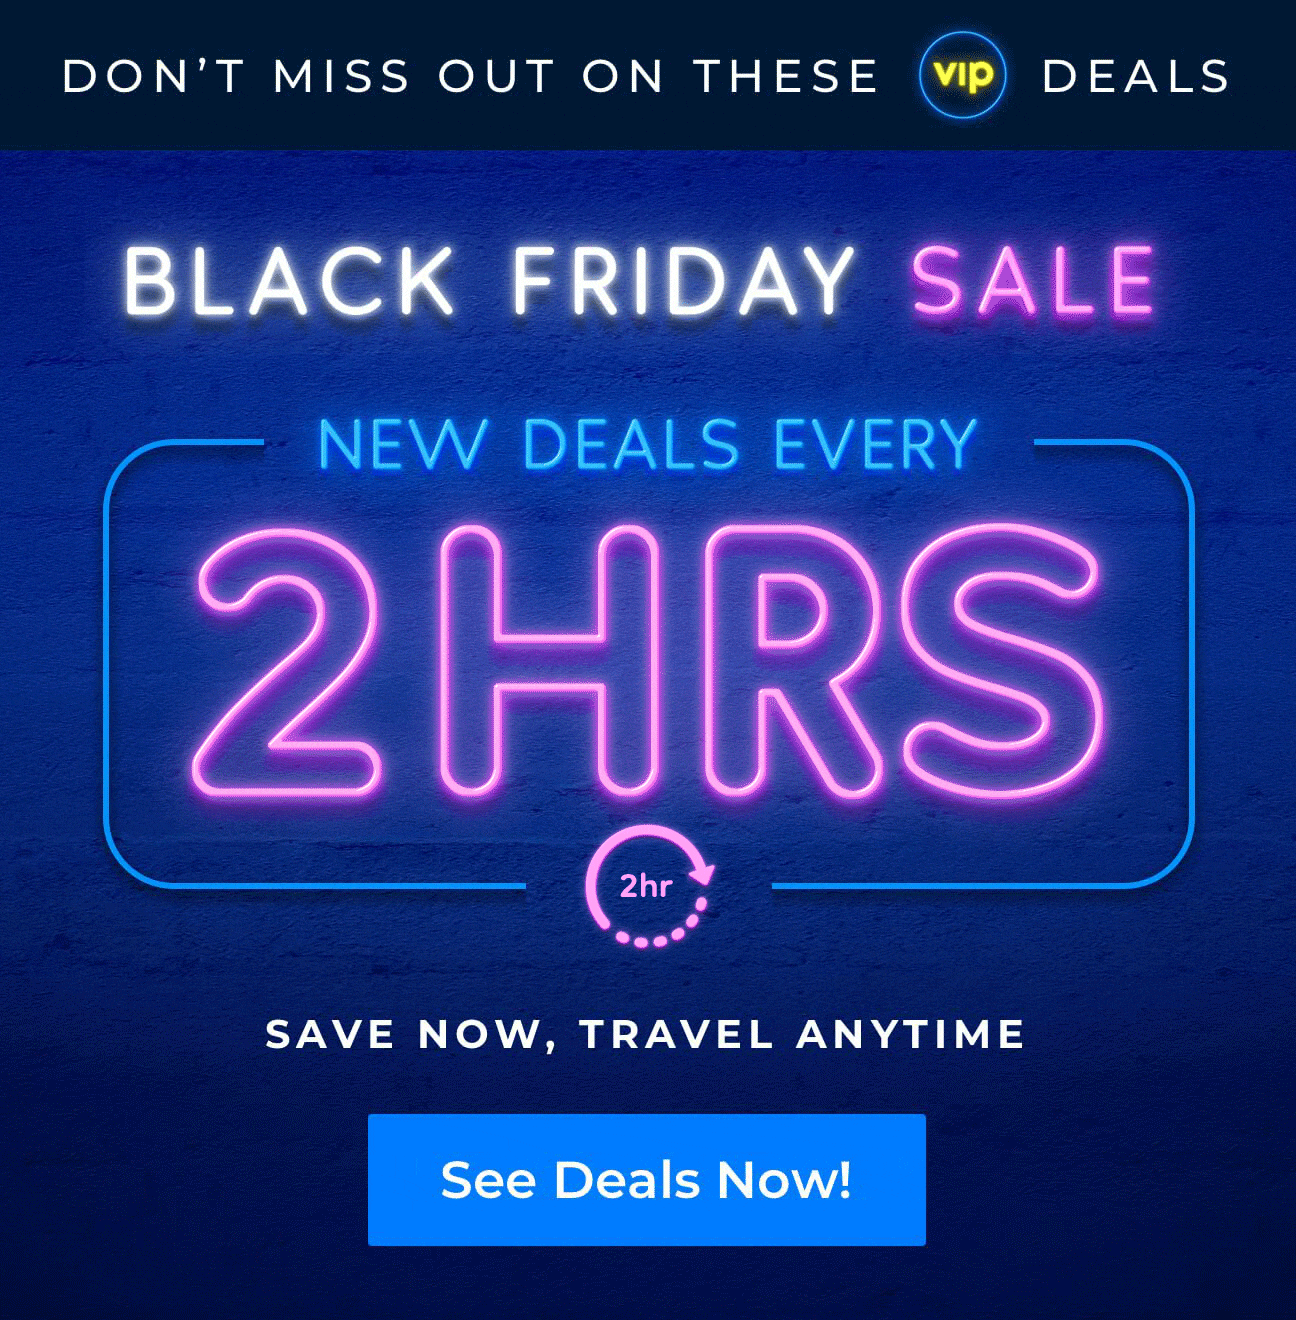 Priceline New deals every 2 hours! Black Friday flash savings continue